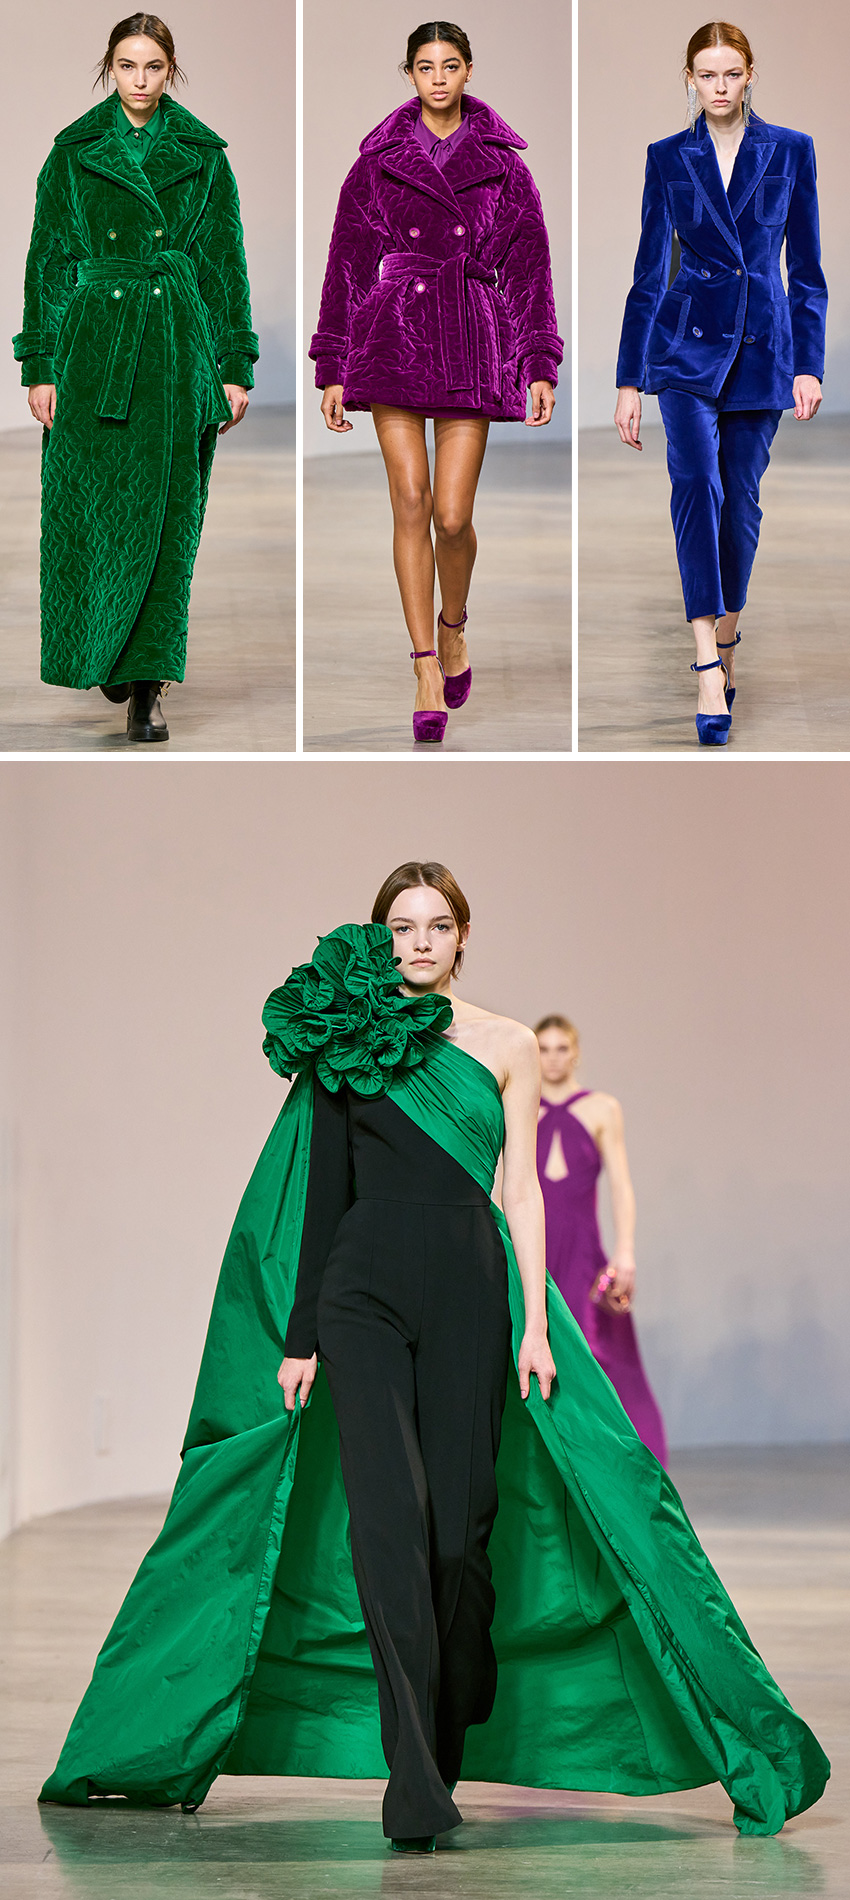 Elie Saab Ready to Wear Fall Winter 2022-23 collection features bold colours of green, purple, blue and black